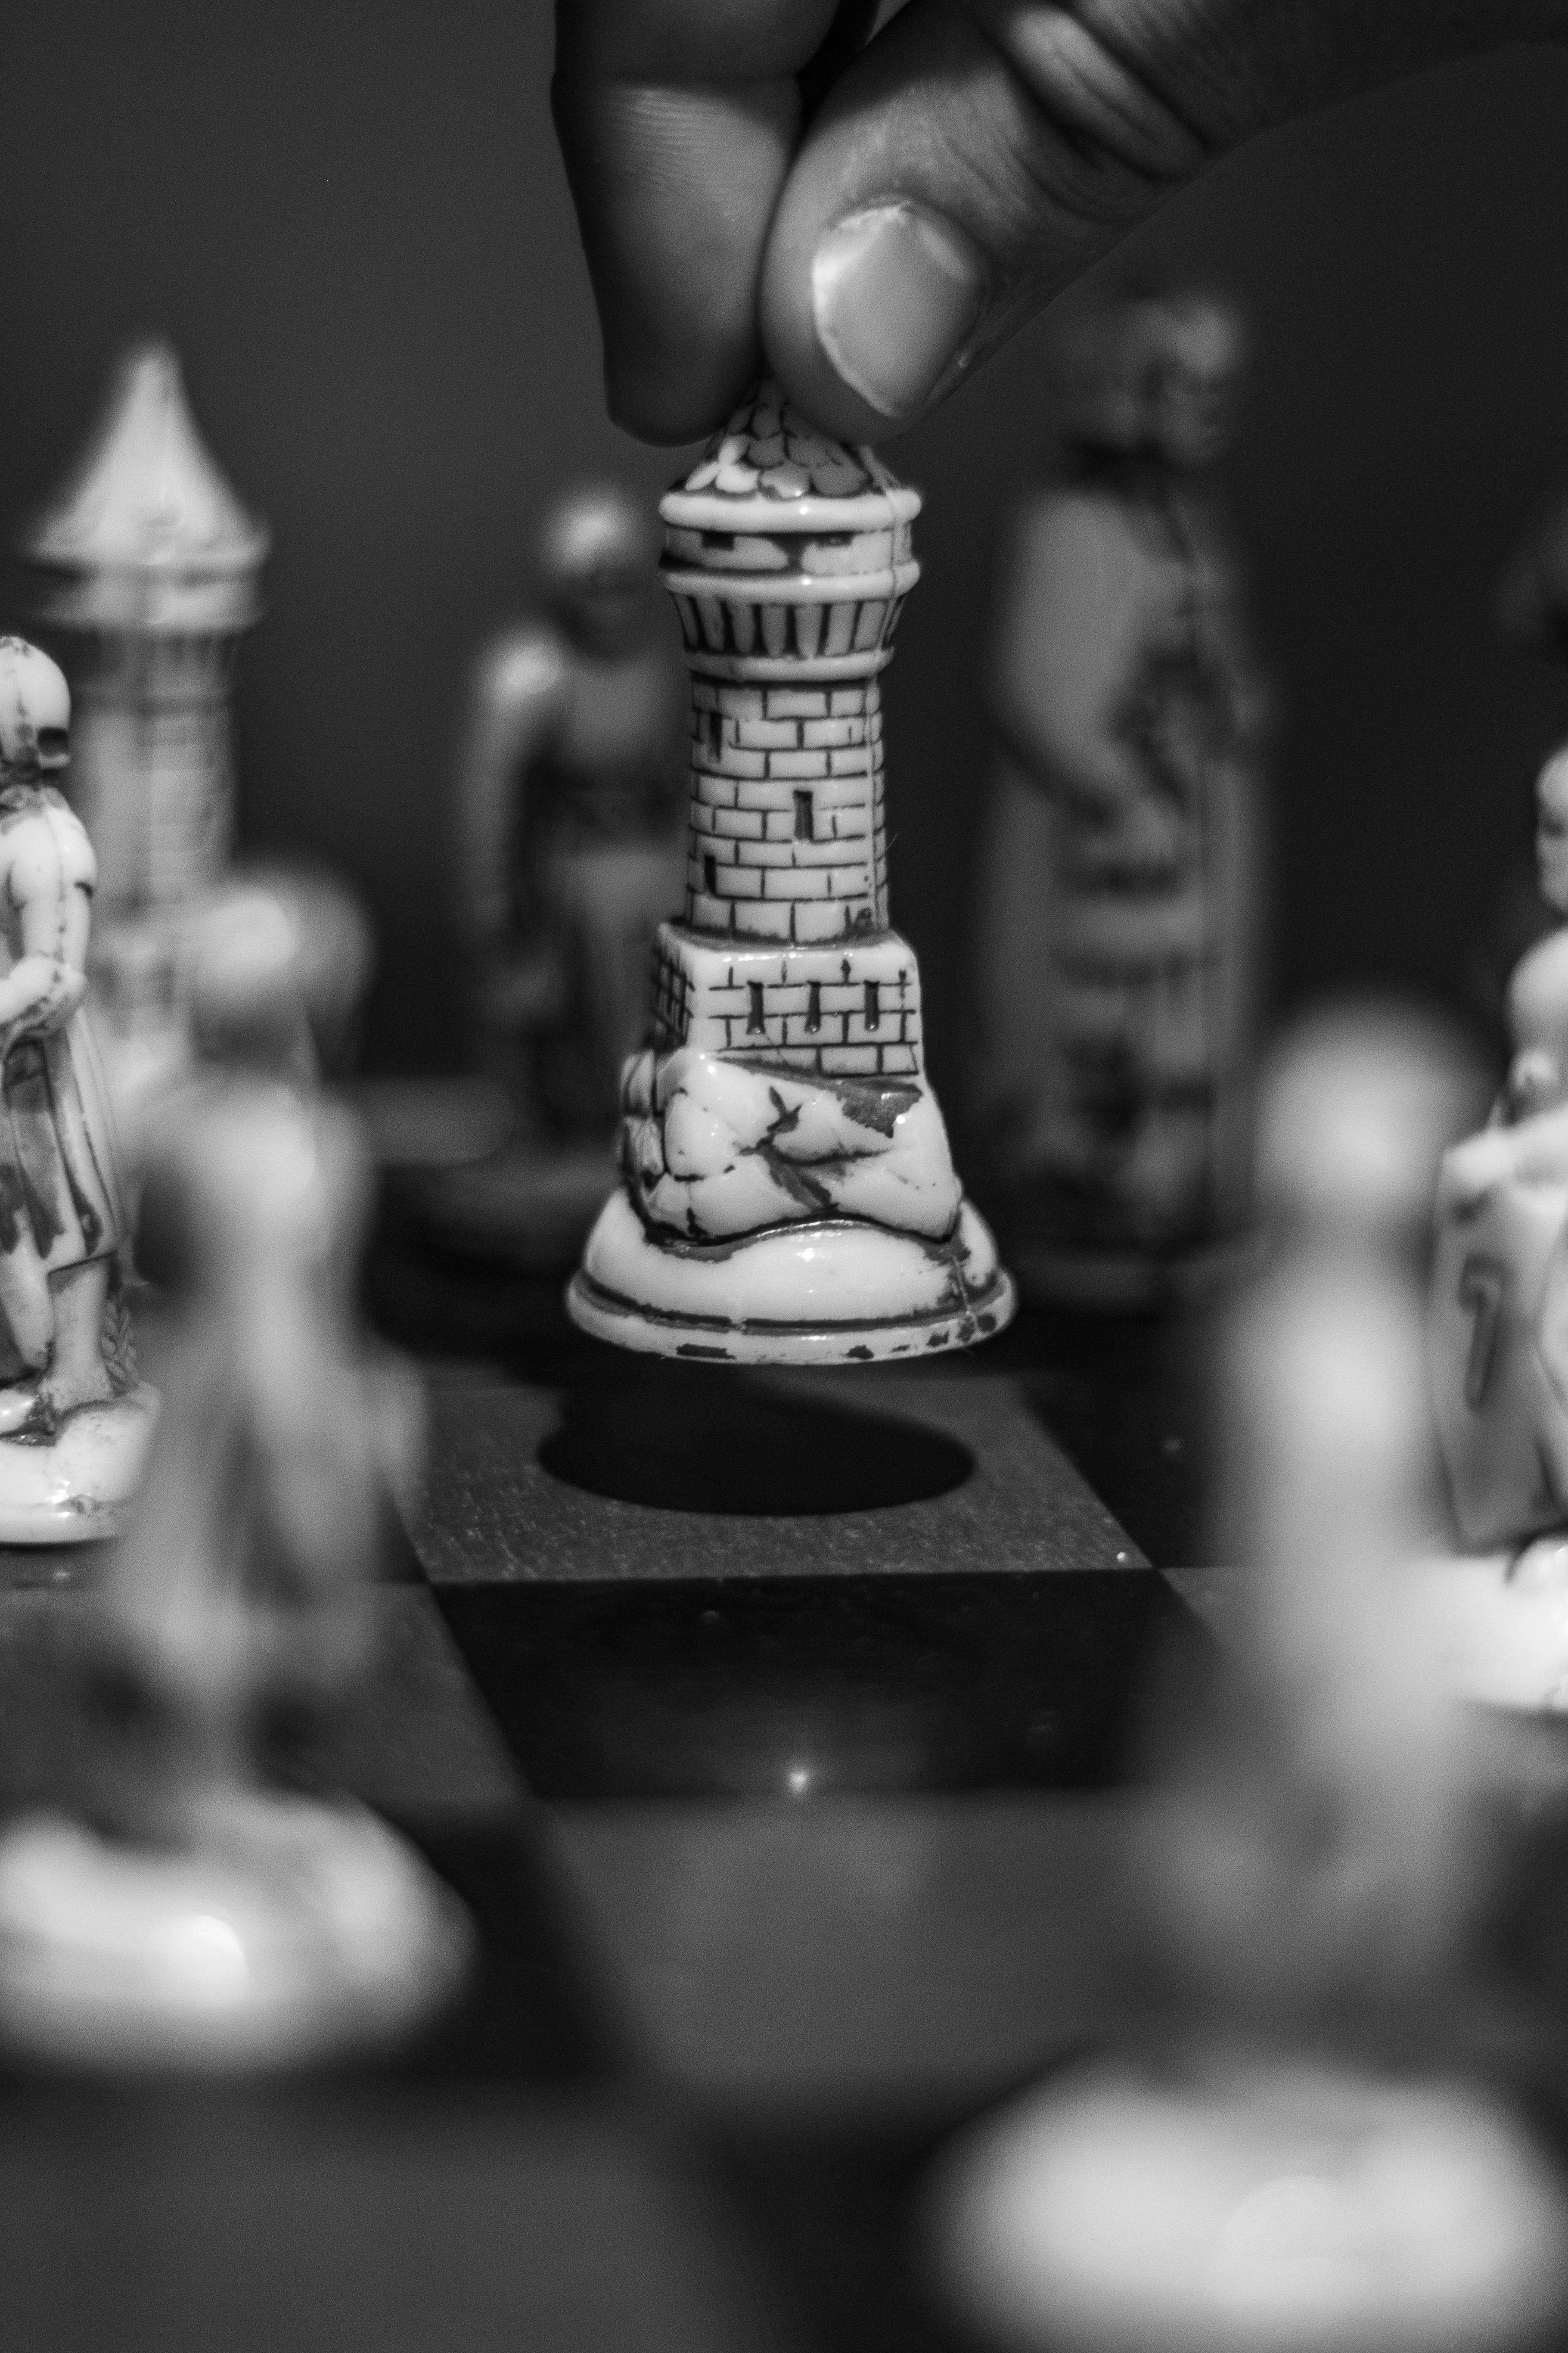 4k Chess Wallpapers - Wallpaper Cave